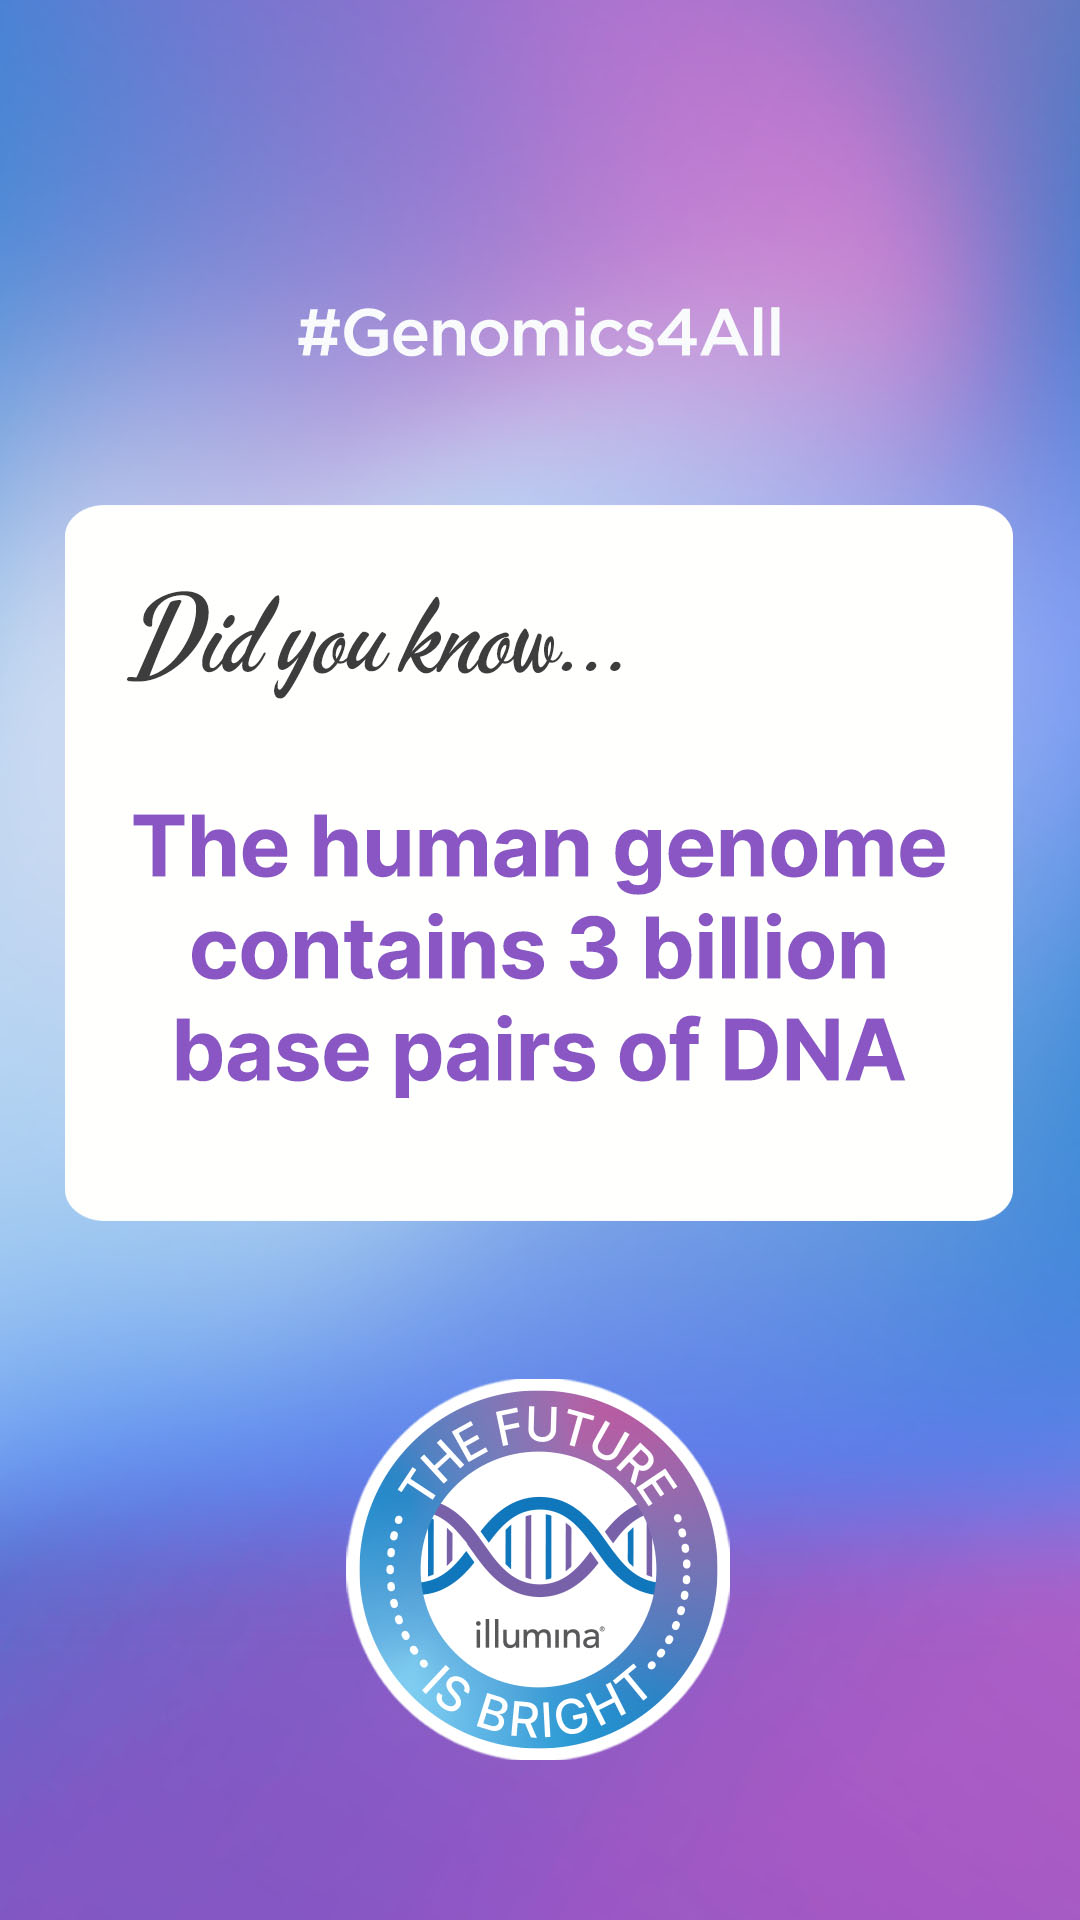 Story image about DNA Day to share on social media